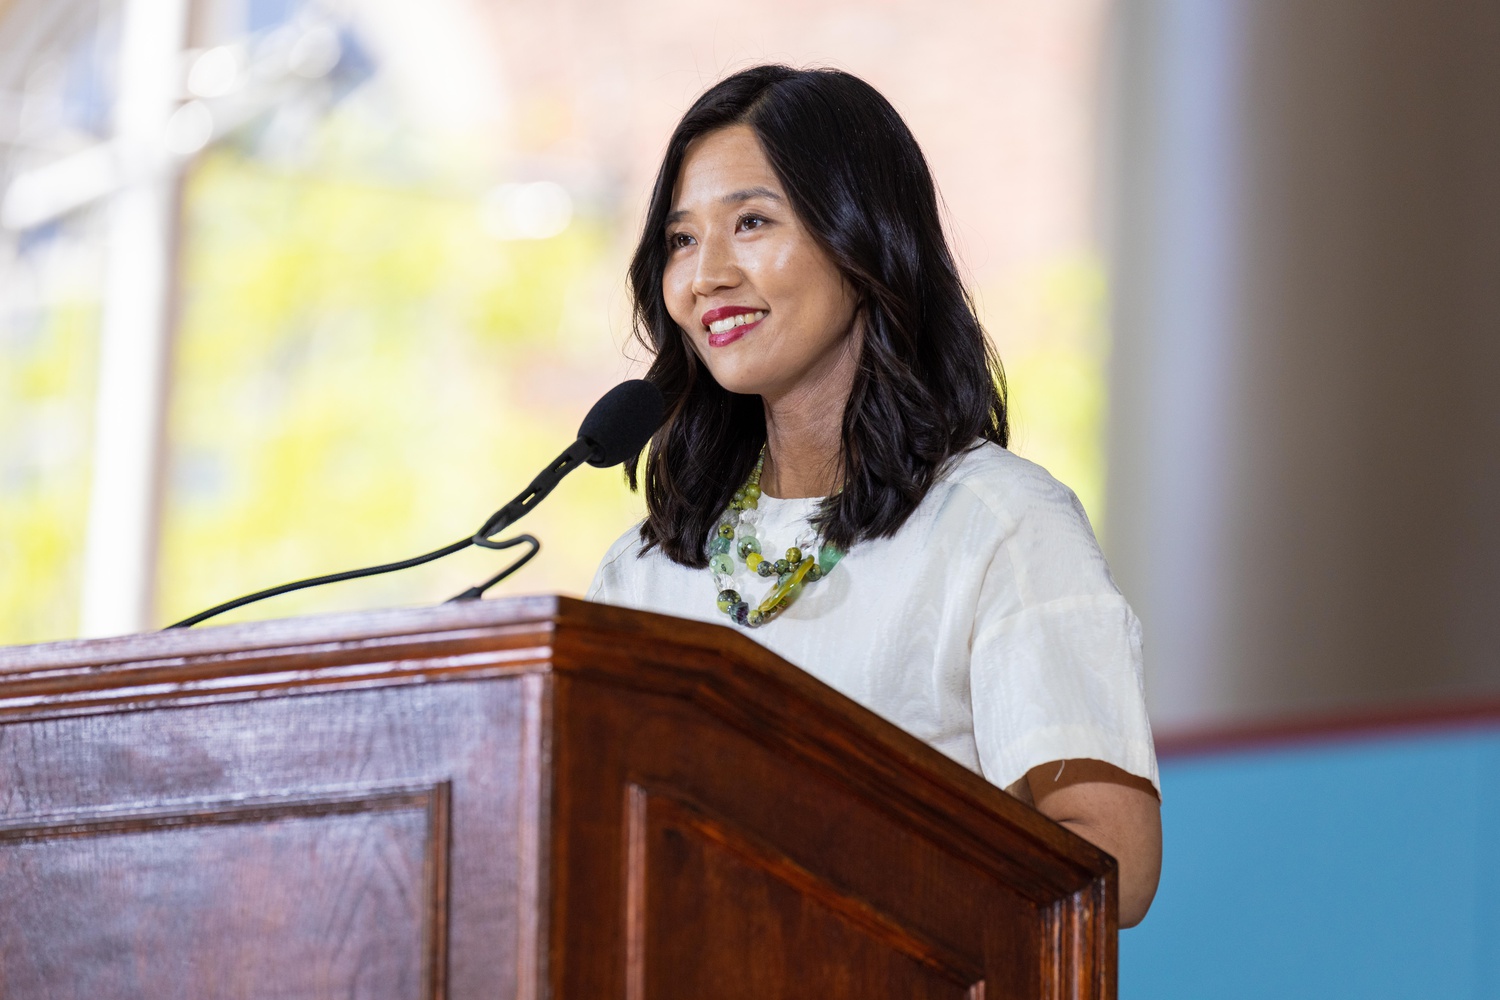 Boston Mayor Michelle Wu '07, pictured here at the Harvard College Class Day event in 2022, was the keynote speaker at the Harvard Asian American Alumni Alliance summit over the weekend.